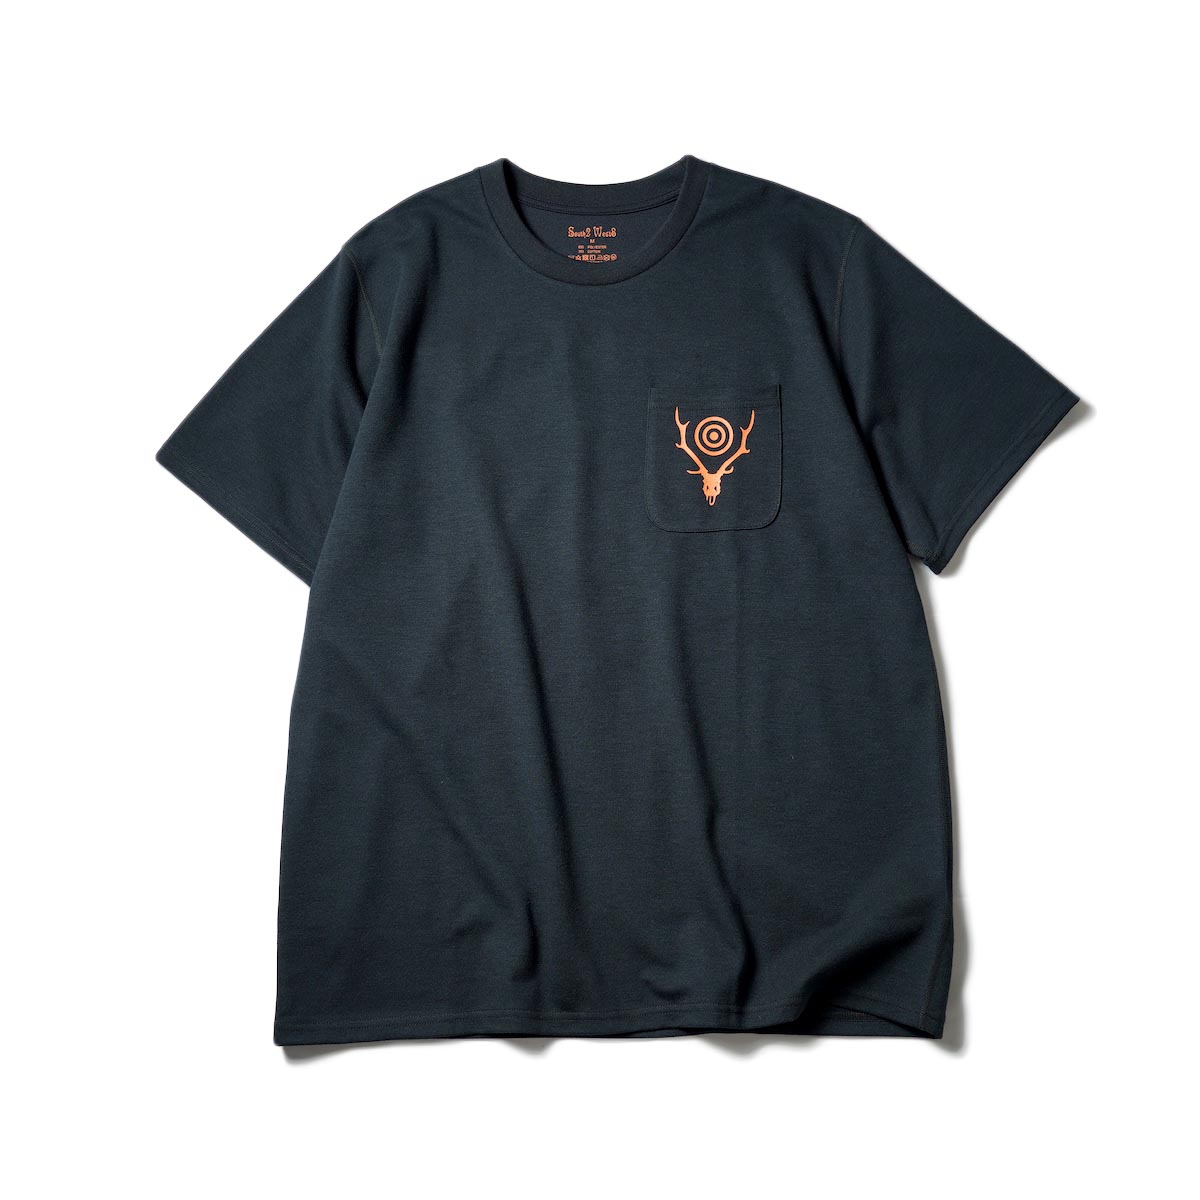 South2 West8 / S/S ROUND POCKET TEE - CIRCLE HORN (Black)